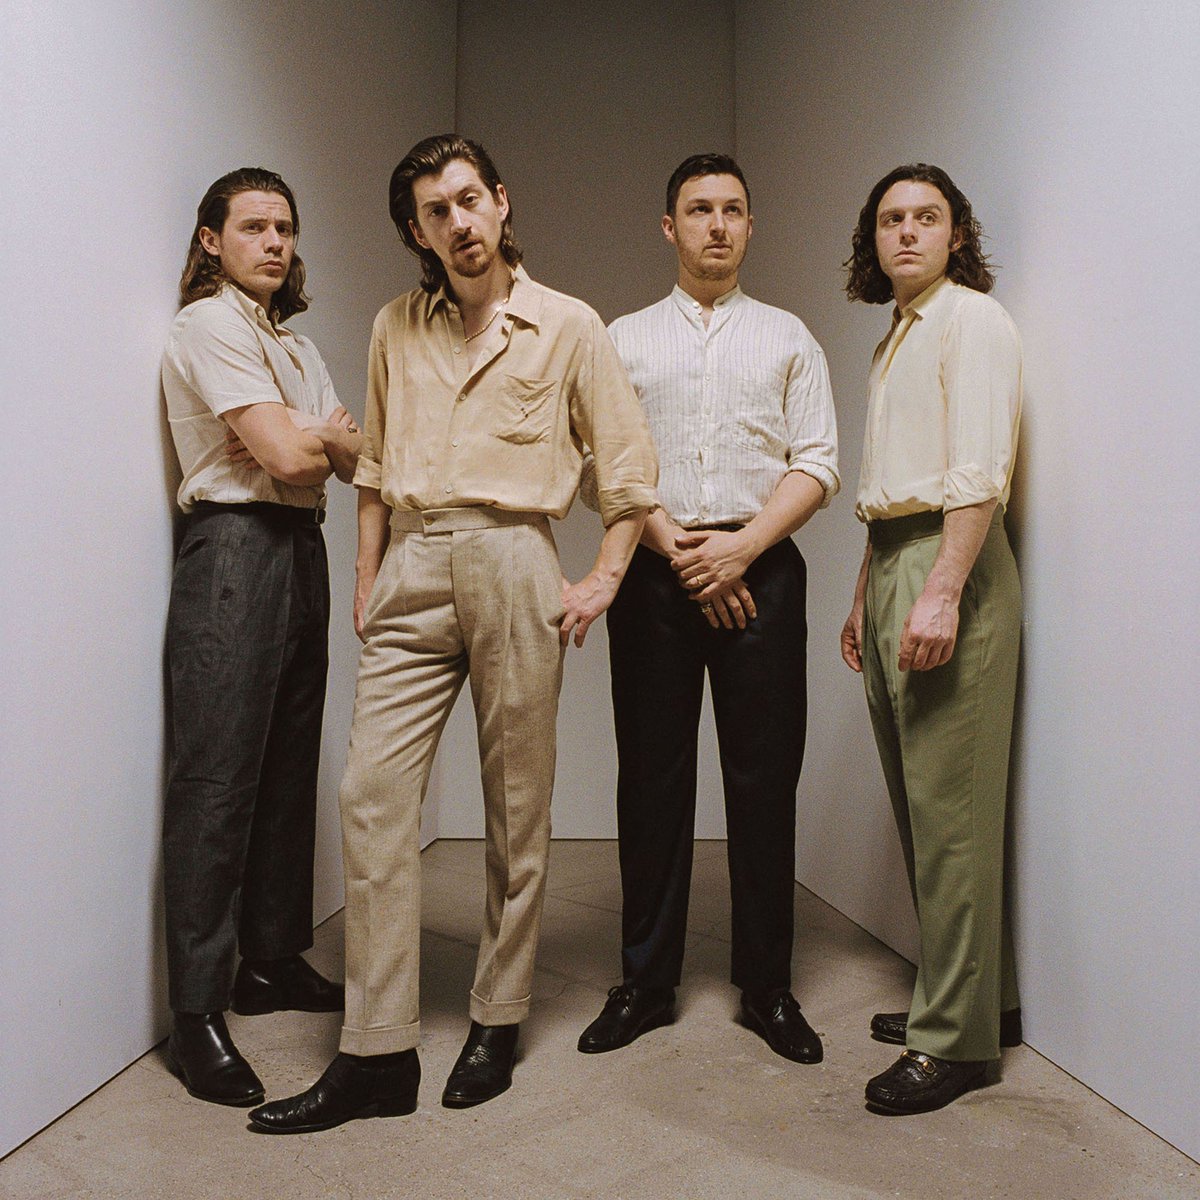 Tranquility Base Hotel & Casino. The new album, out now smarturl.it/TranquilityBase